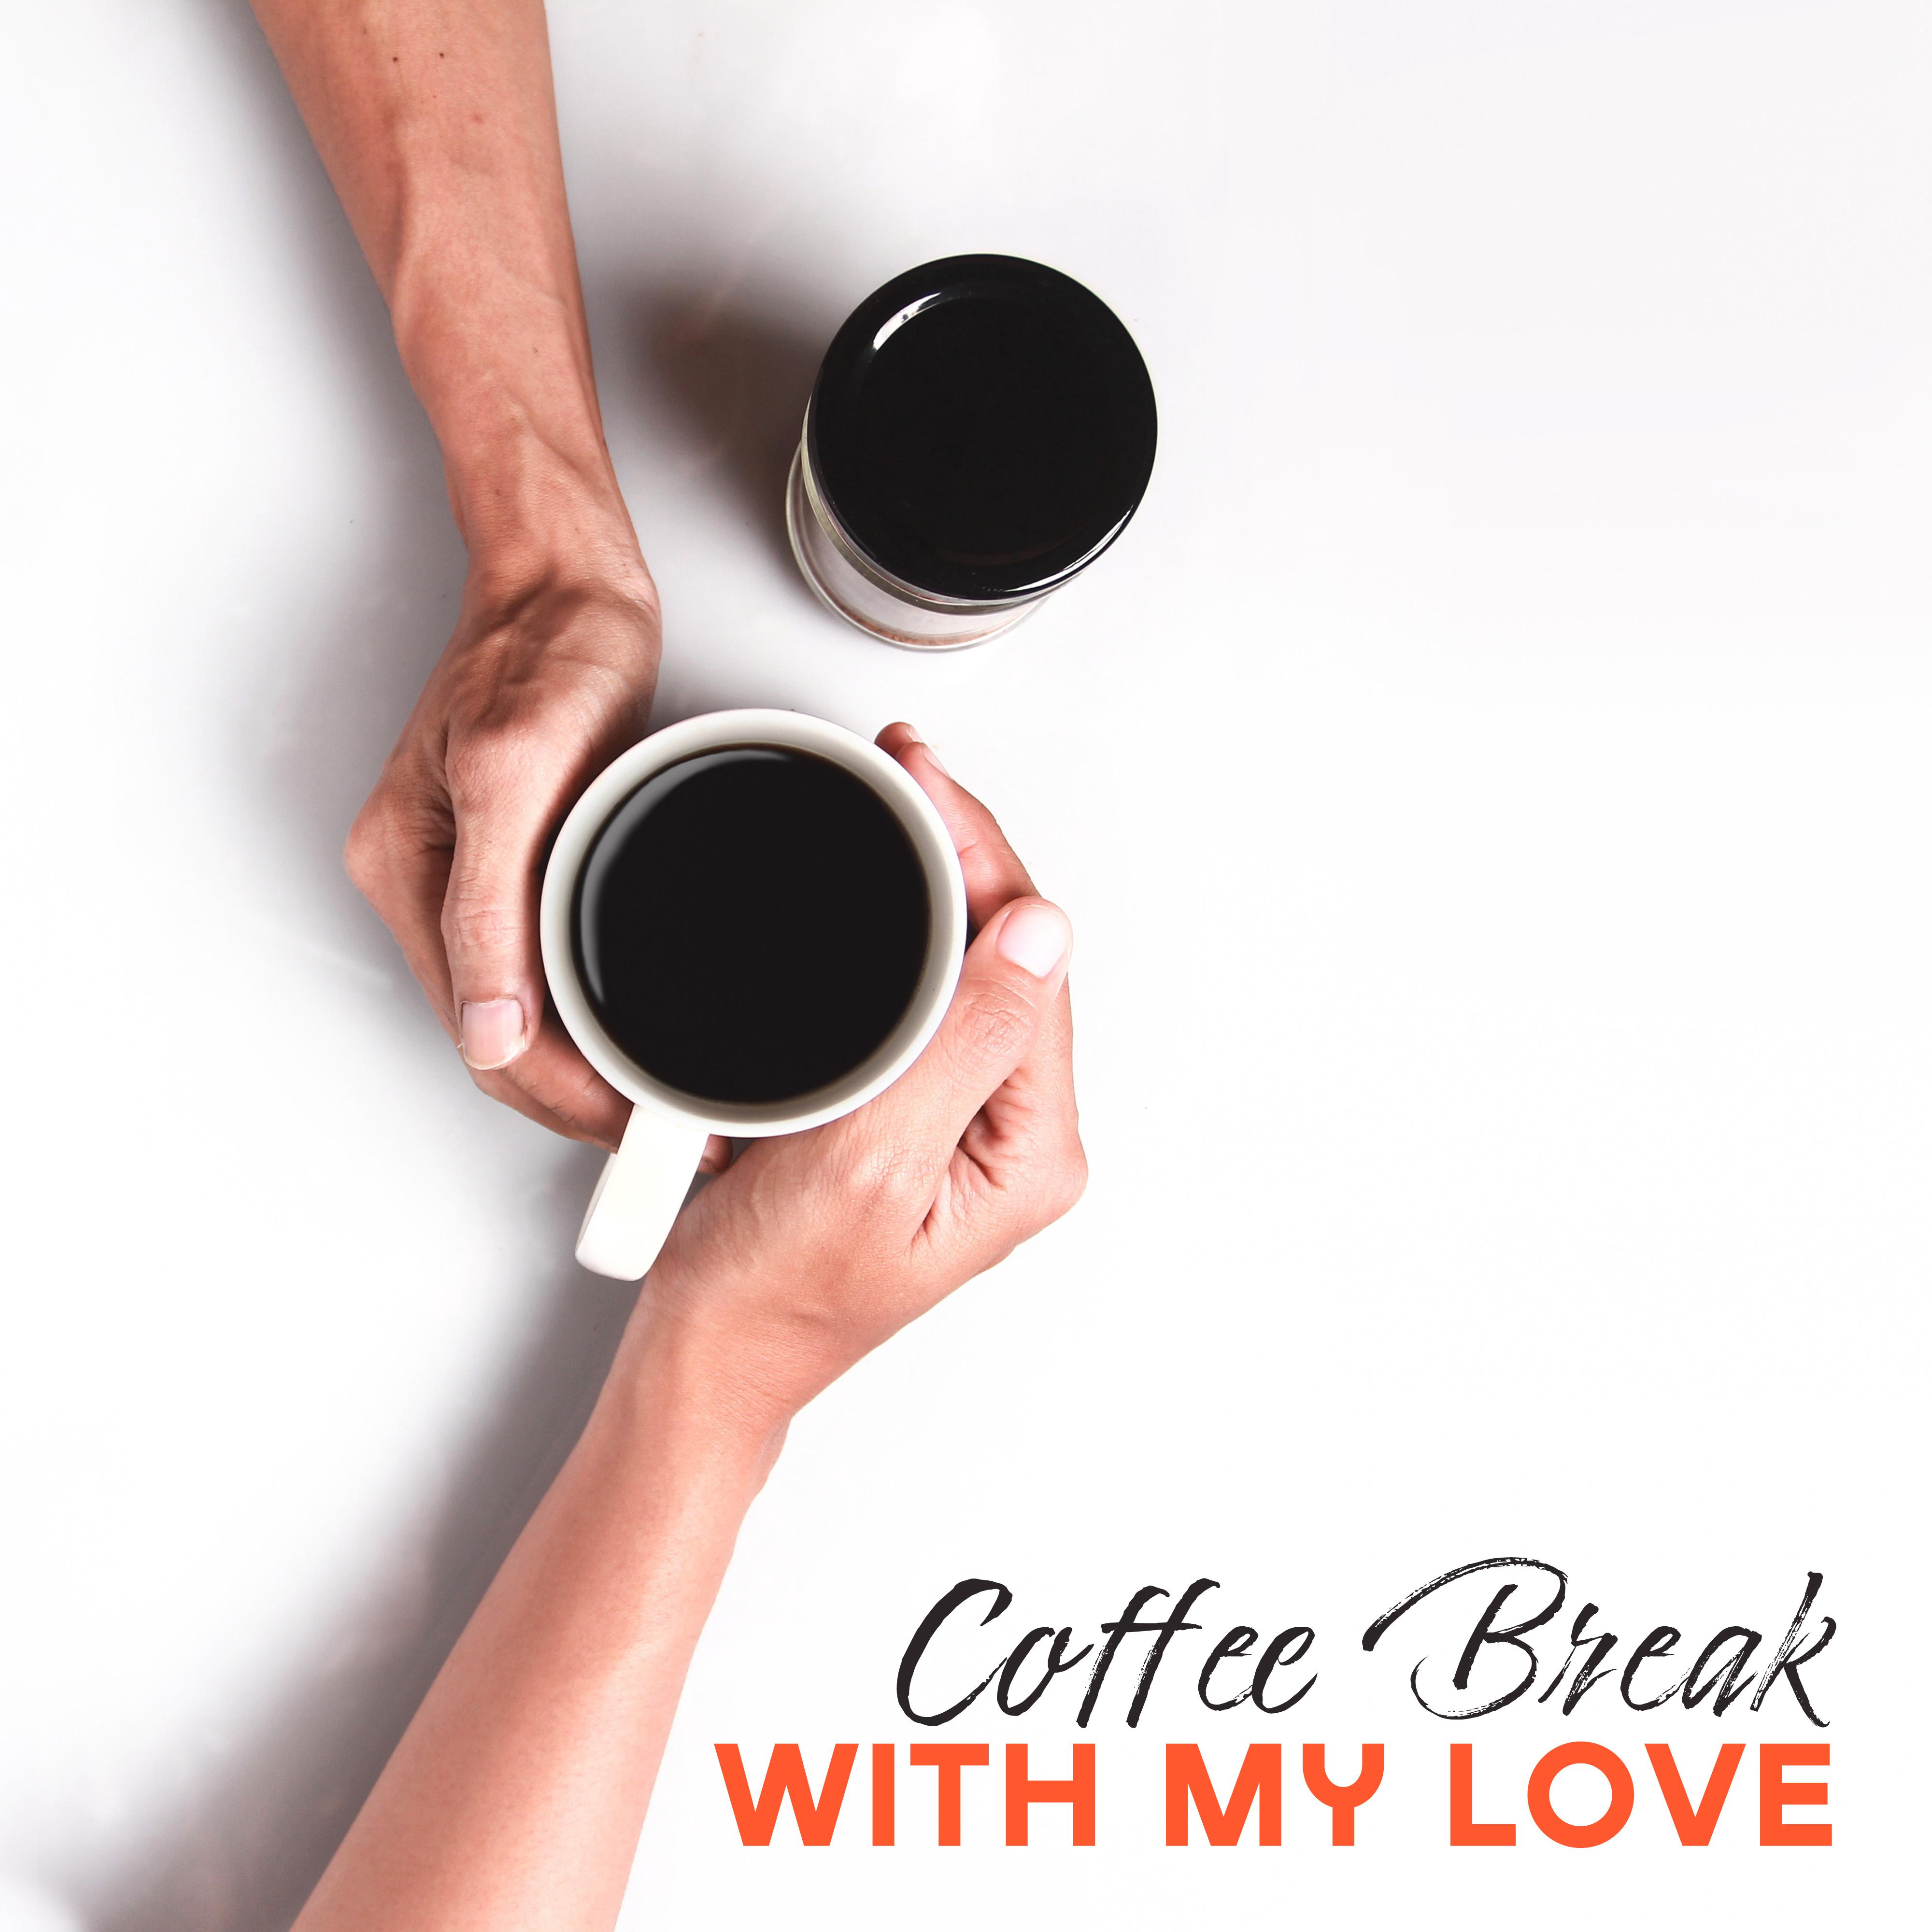 Coffee Break with My Love – Smooth Jazz Relaxing Music, Easy Listening Melodies for Couple’s Meeting, Soft Background Sounds for Cafe, Calming Down, Stress Relief